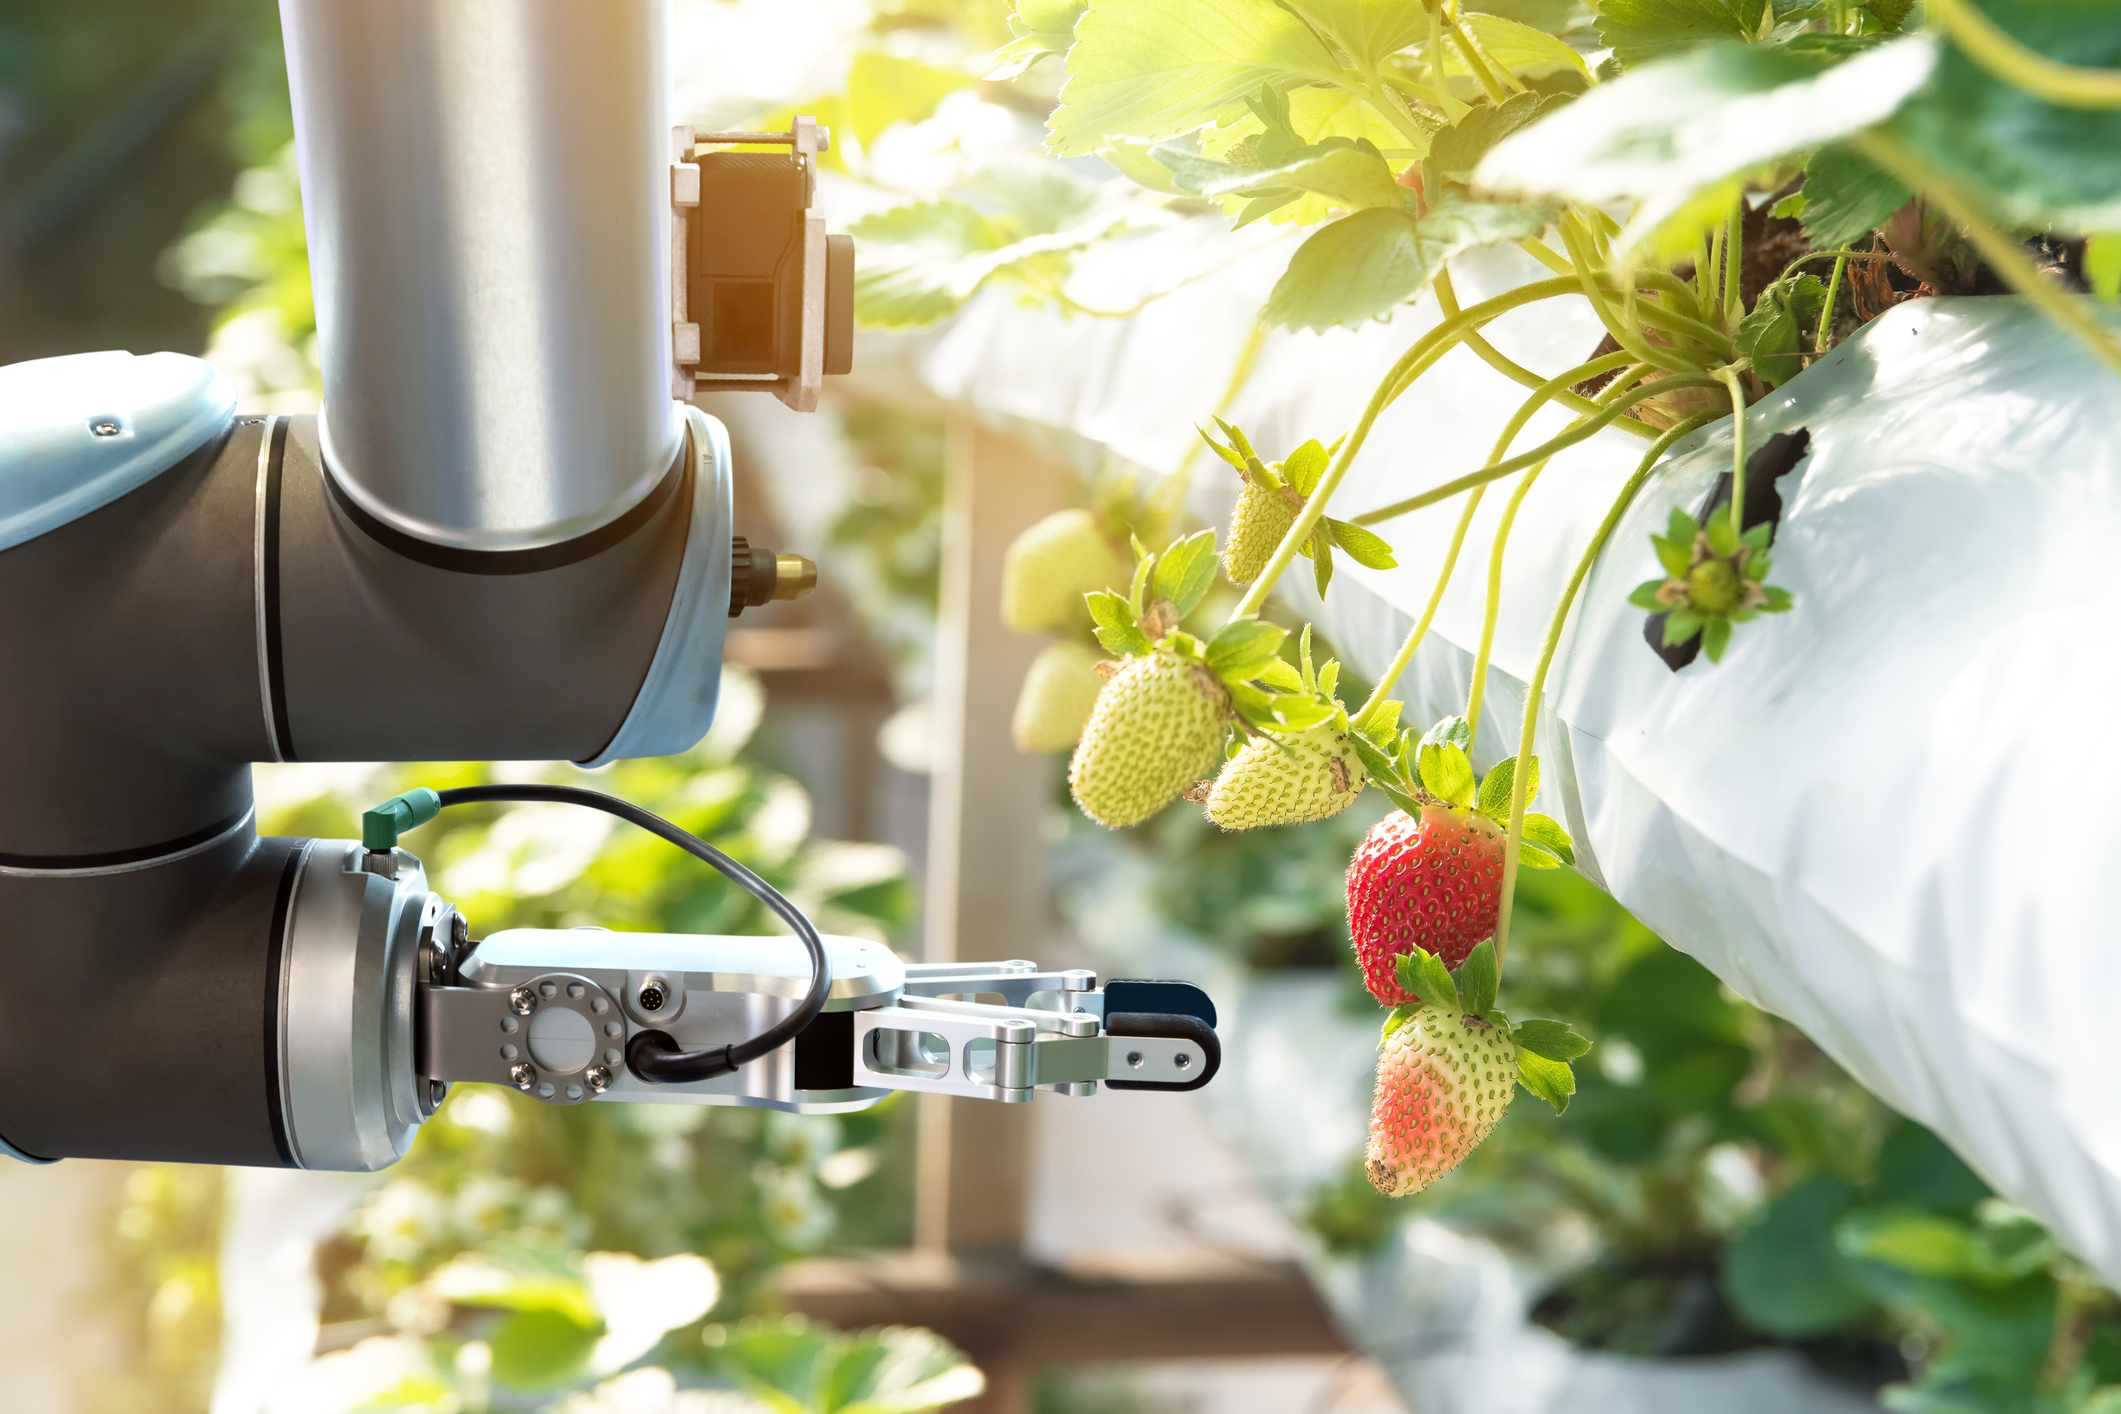 Agribots – How Robots Made Their Way Onto Farms